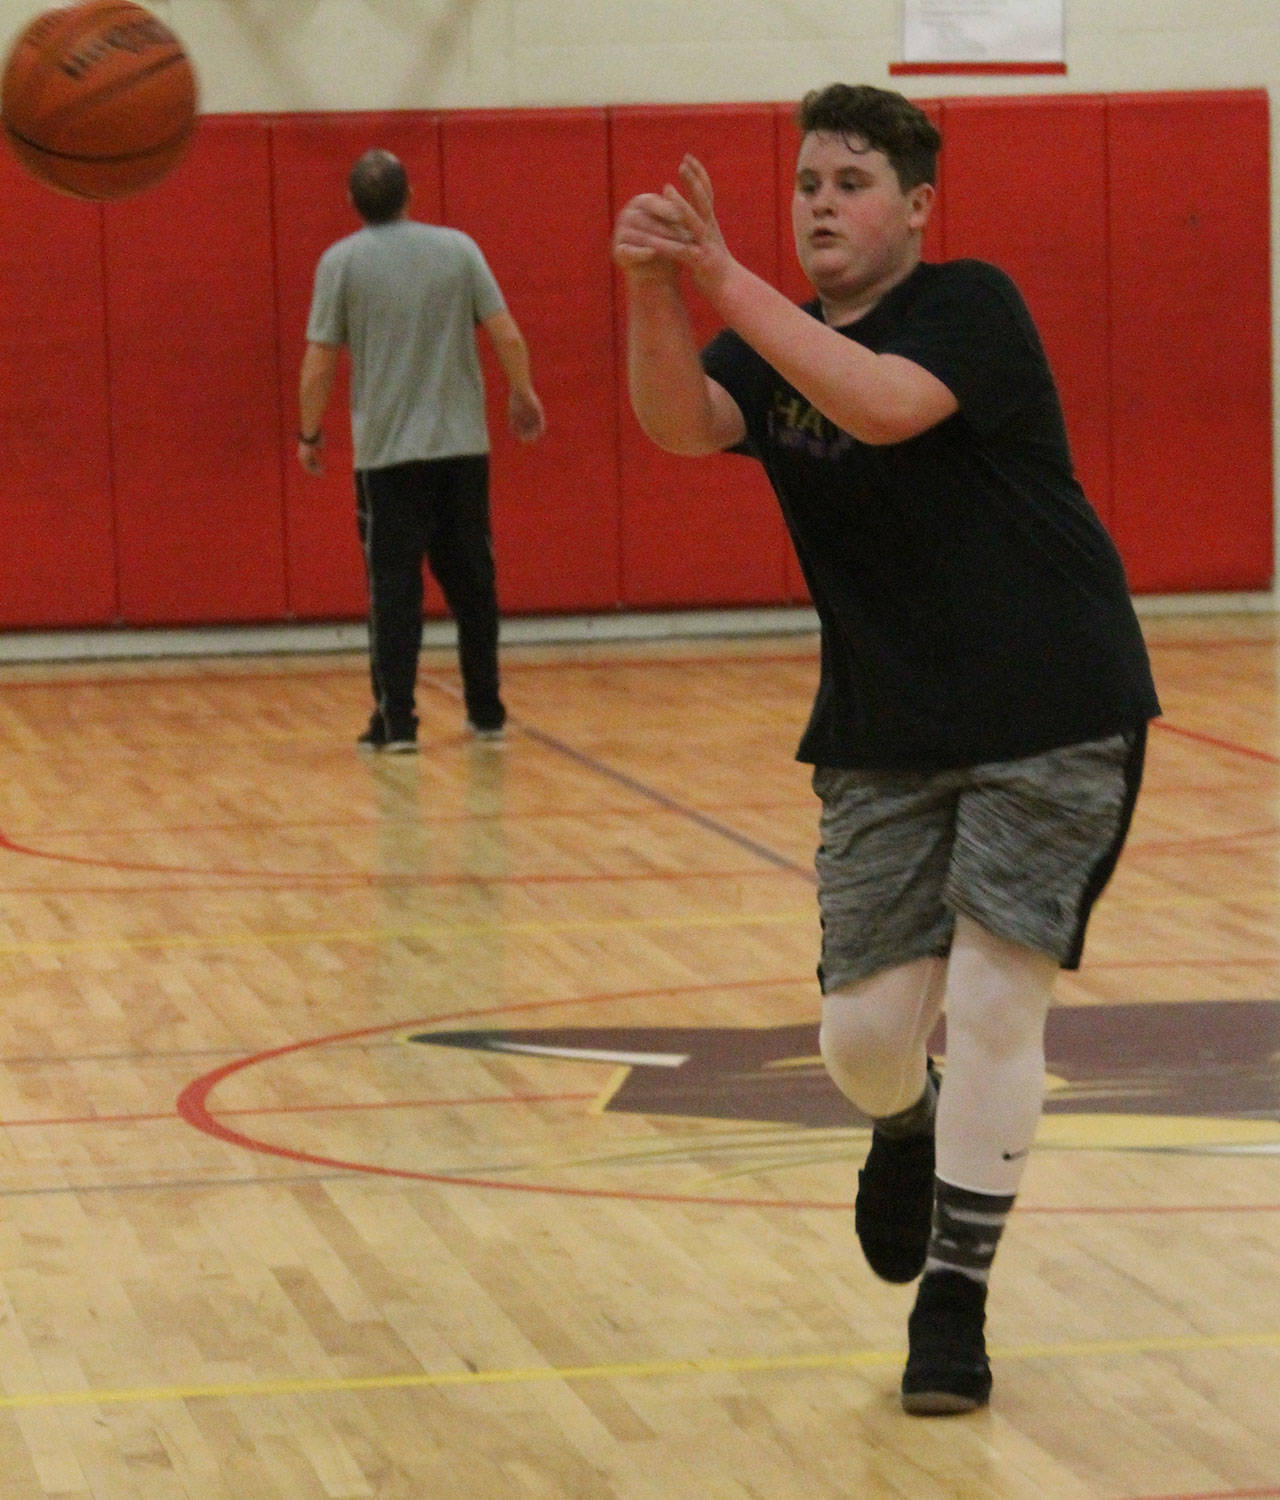 Eighth-grader John Leete makes a pass during a drill at Wednesday’s practice. (Photo by Jim Waller/Whidbey News-Times)